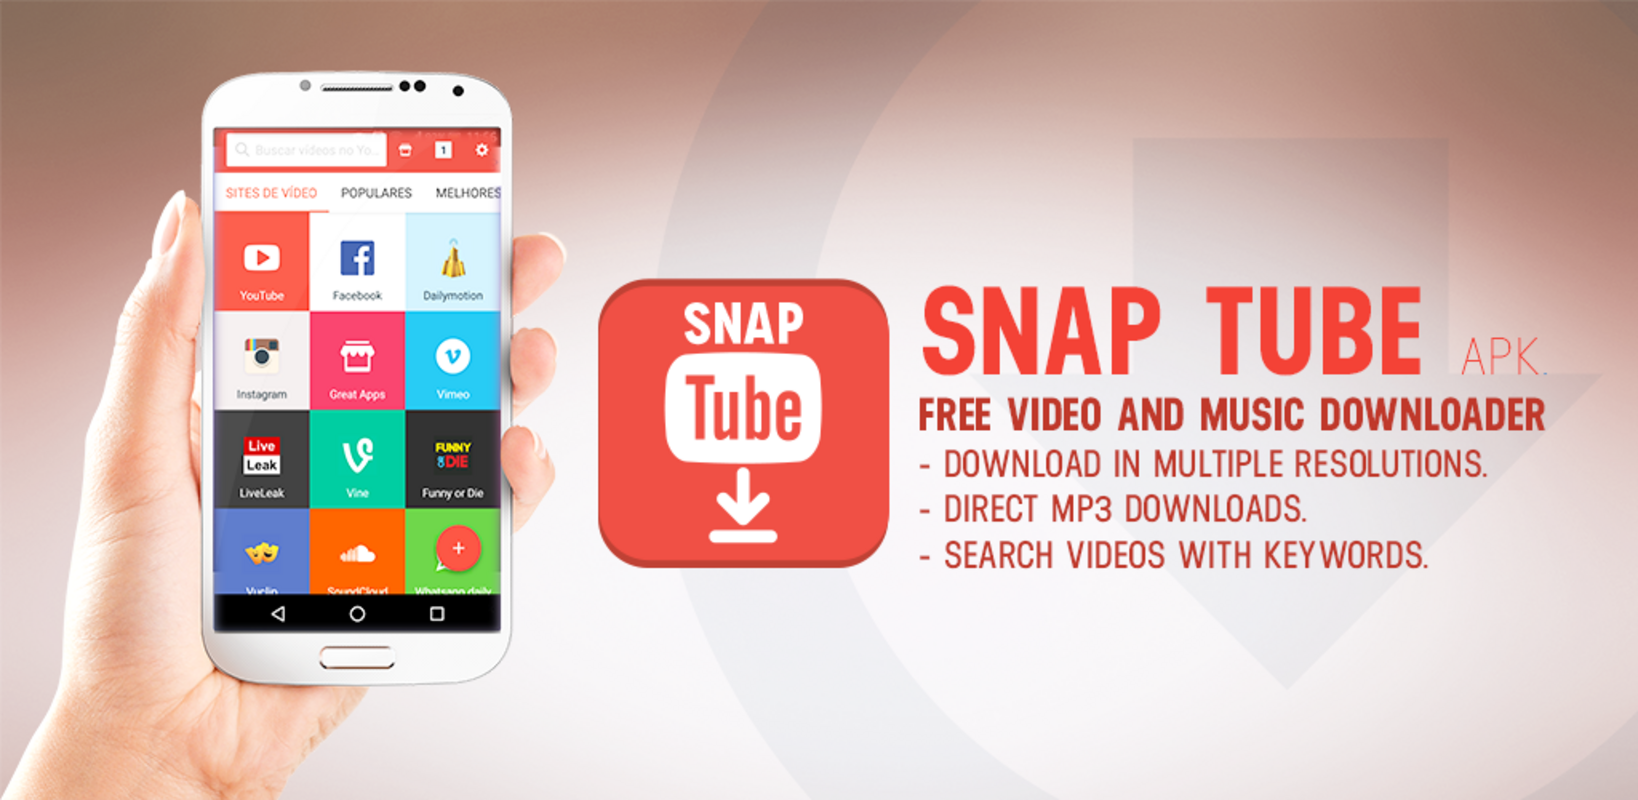 new snaptube guide 1.0 APK feature